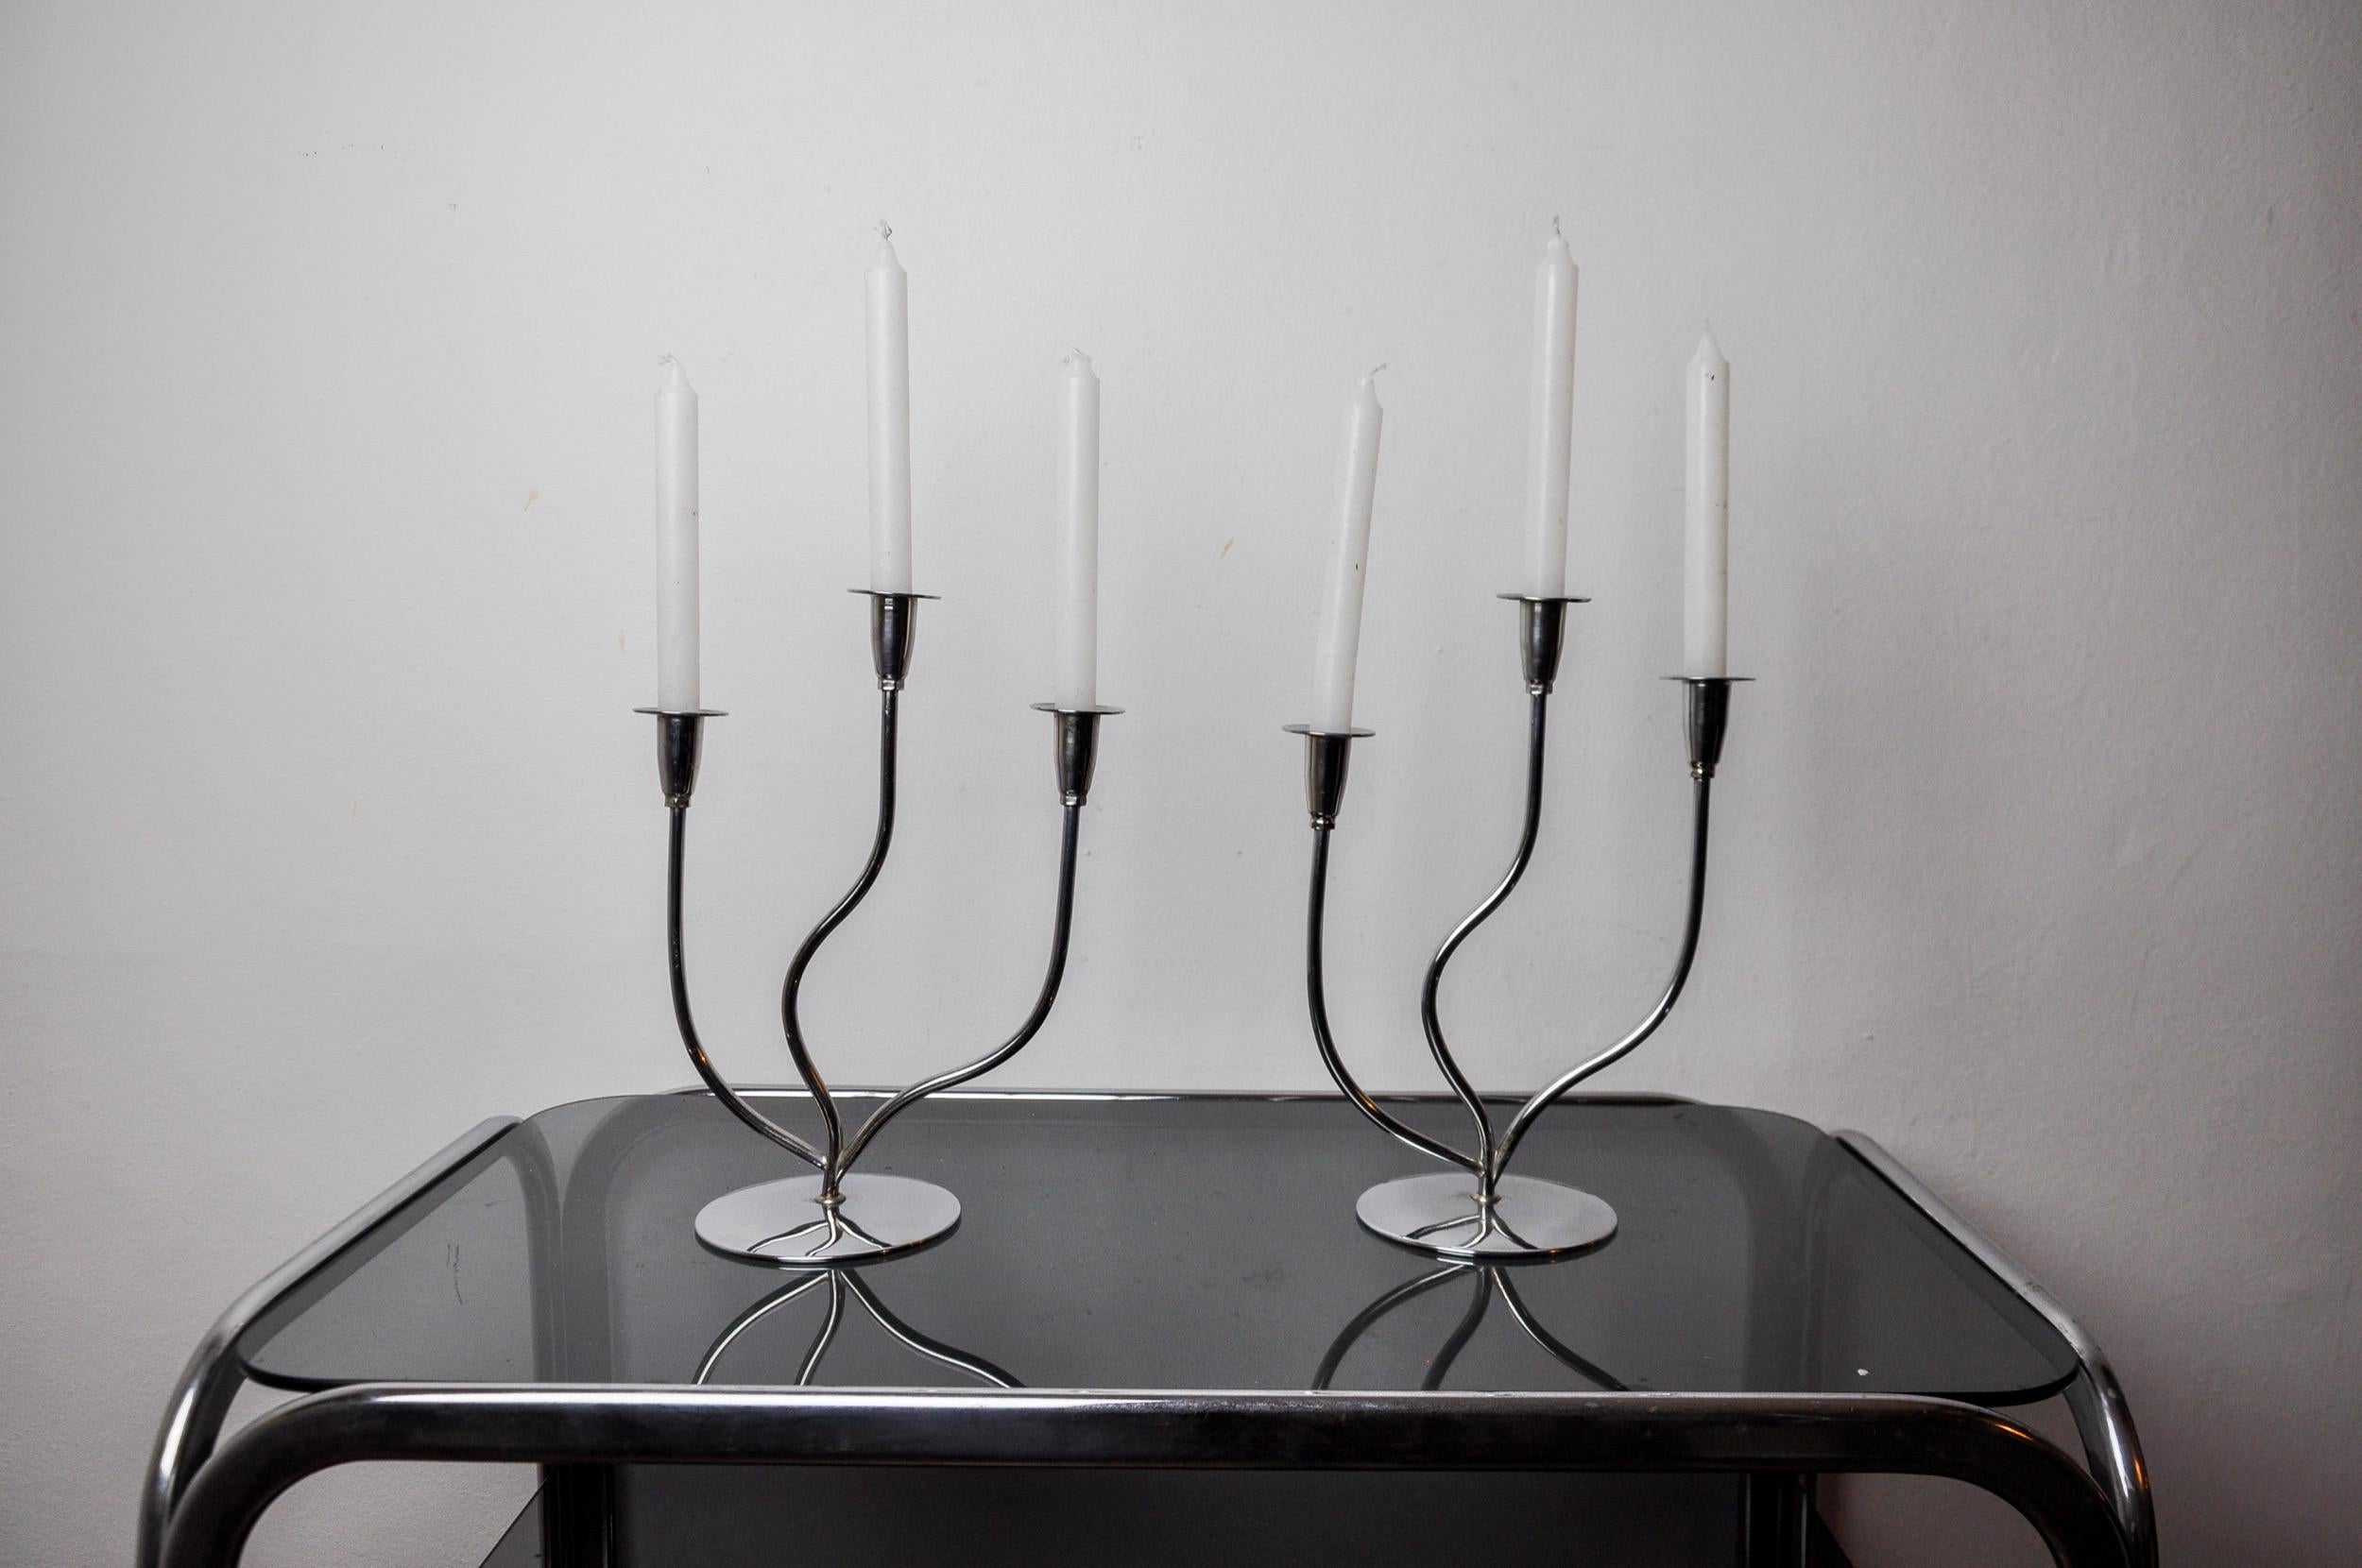 Very beautiful pair of art deco stainless steel candlesticks designed and produced in Spain in the 1970s. Structure in 18/8 stainless steel that can accommodate 3 candles. Superb designer object that will decorate your interior wonderfully. Good